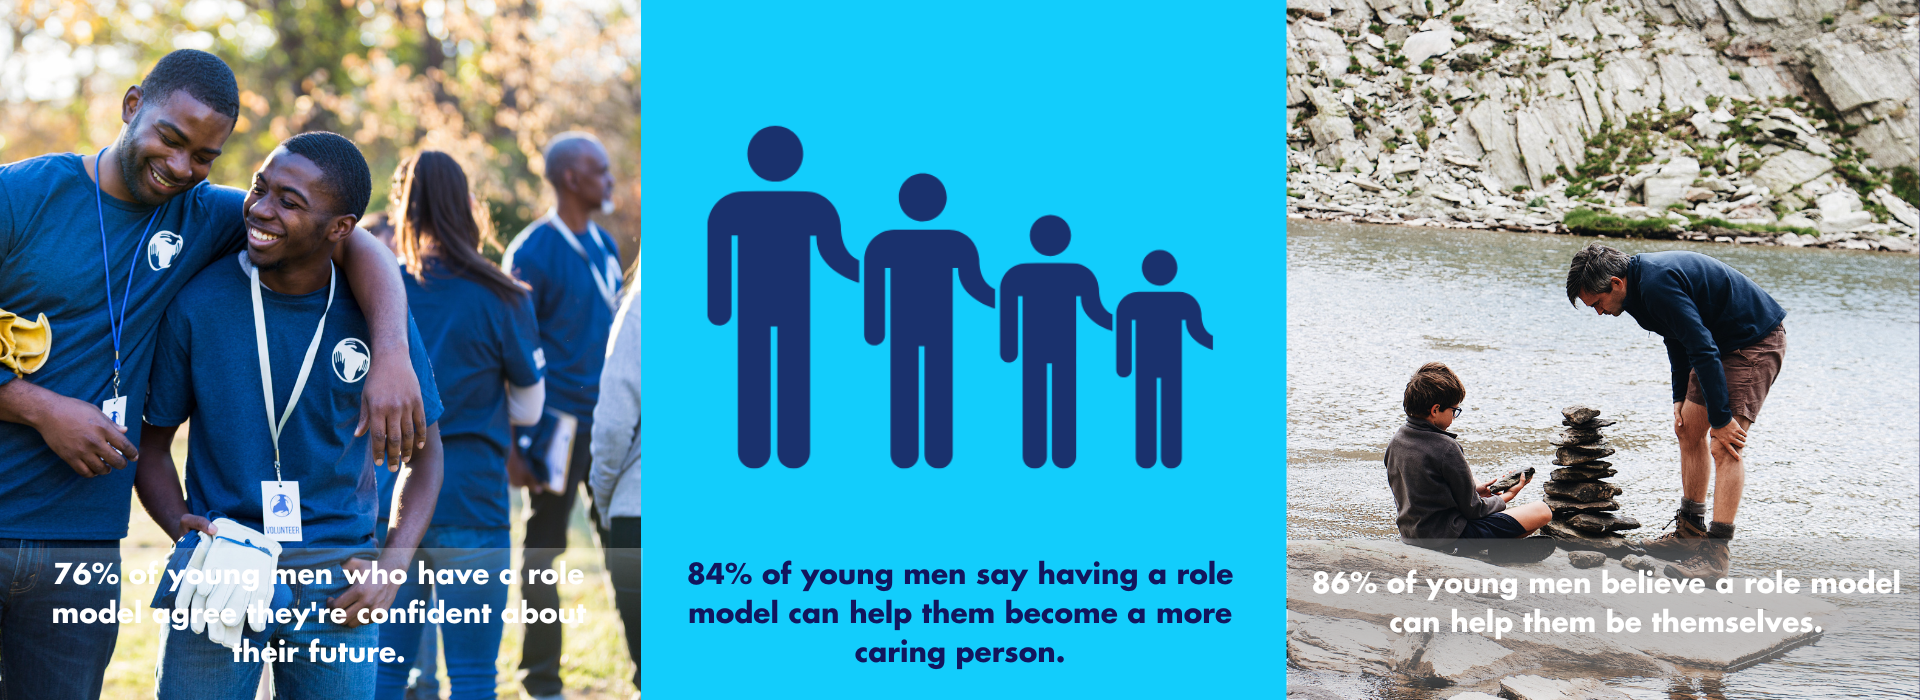 76% of young men who have a role model agree they're confident about their future. 84% of young men say having a role model can help them become a more caring person. 86% of young men believe a role model can help them be themselves